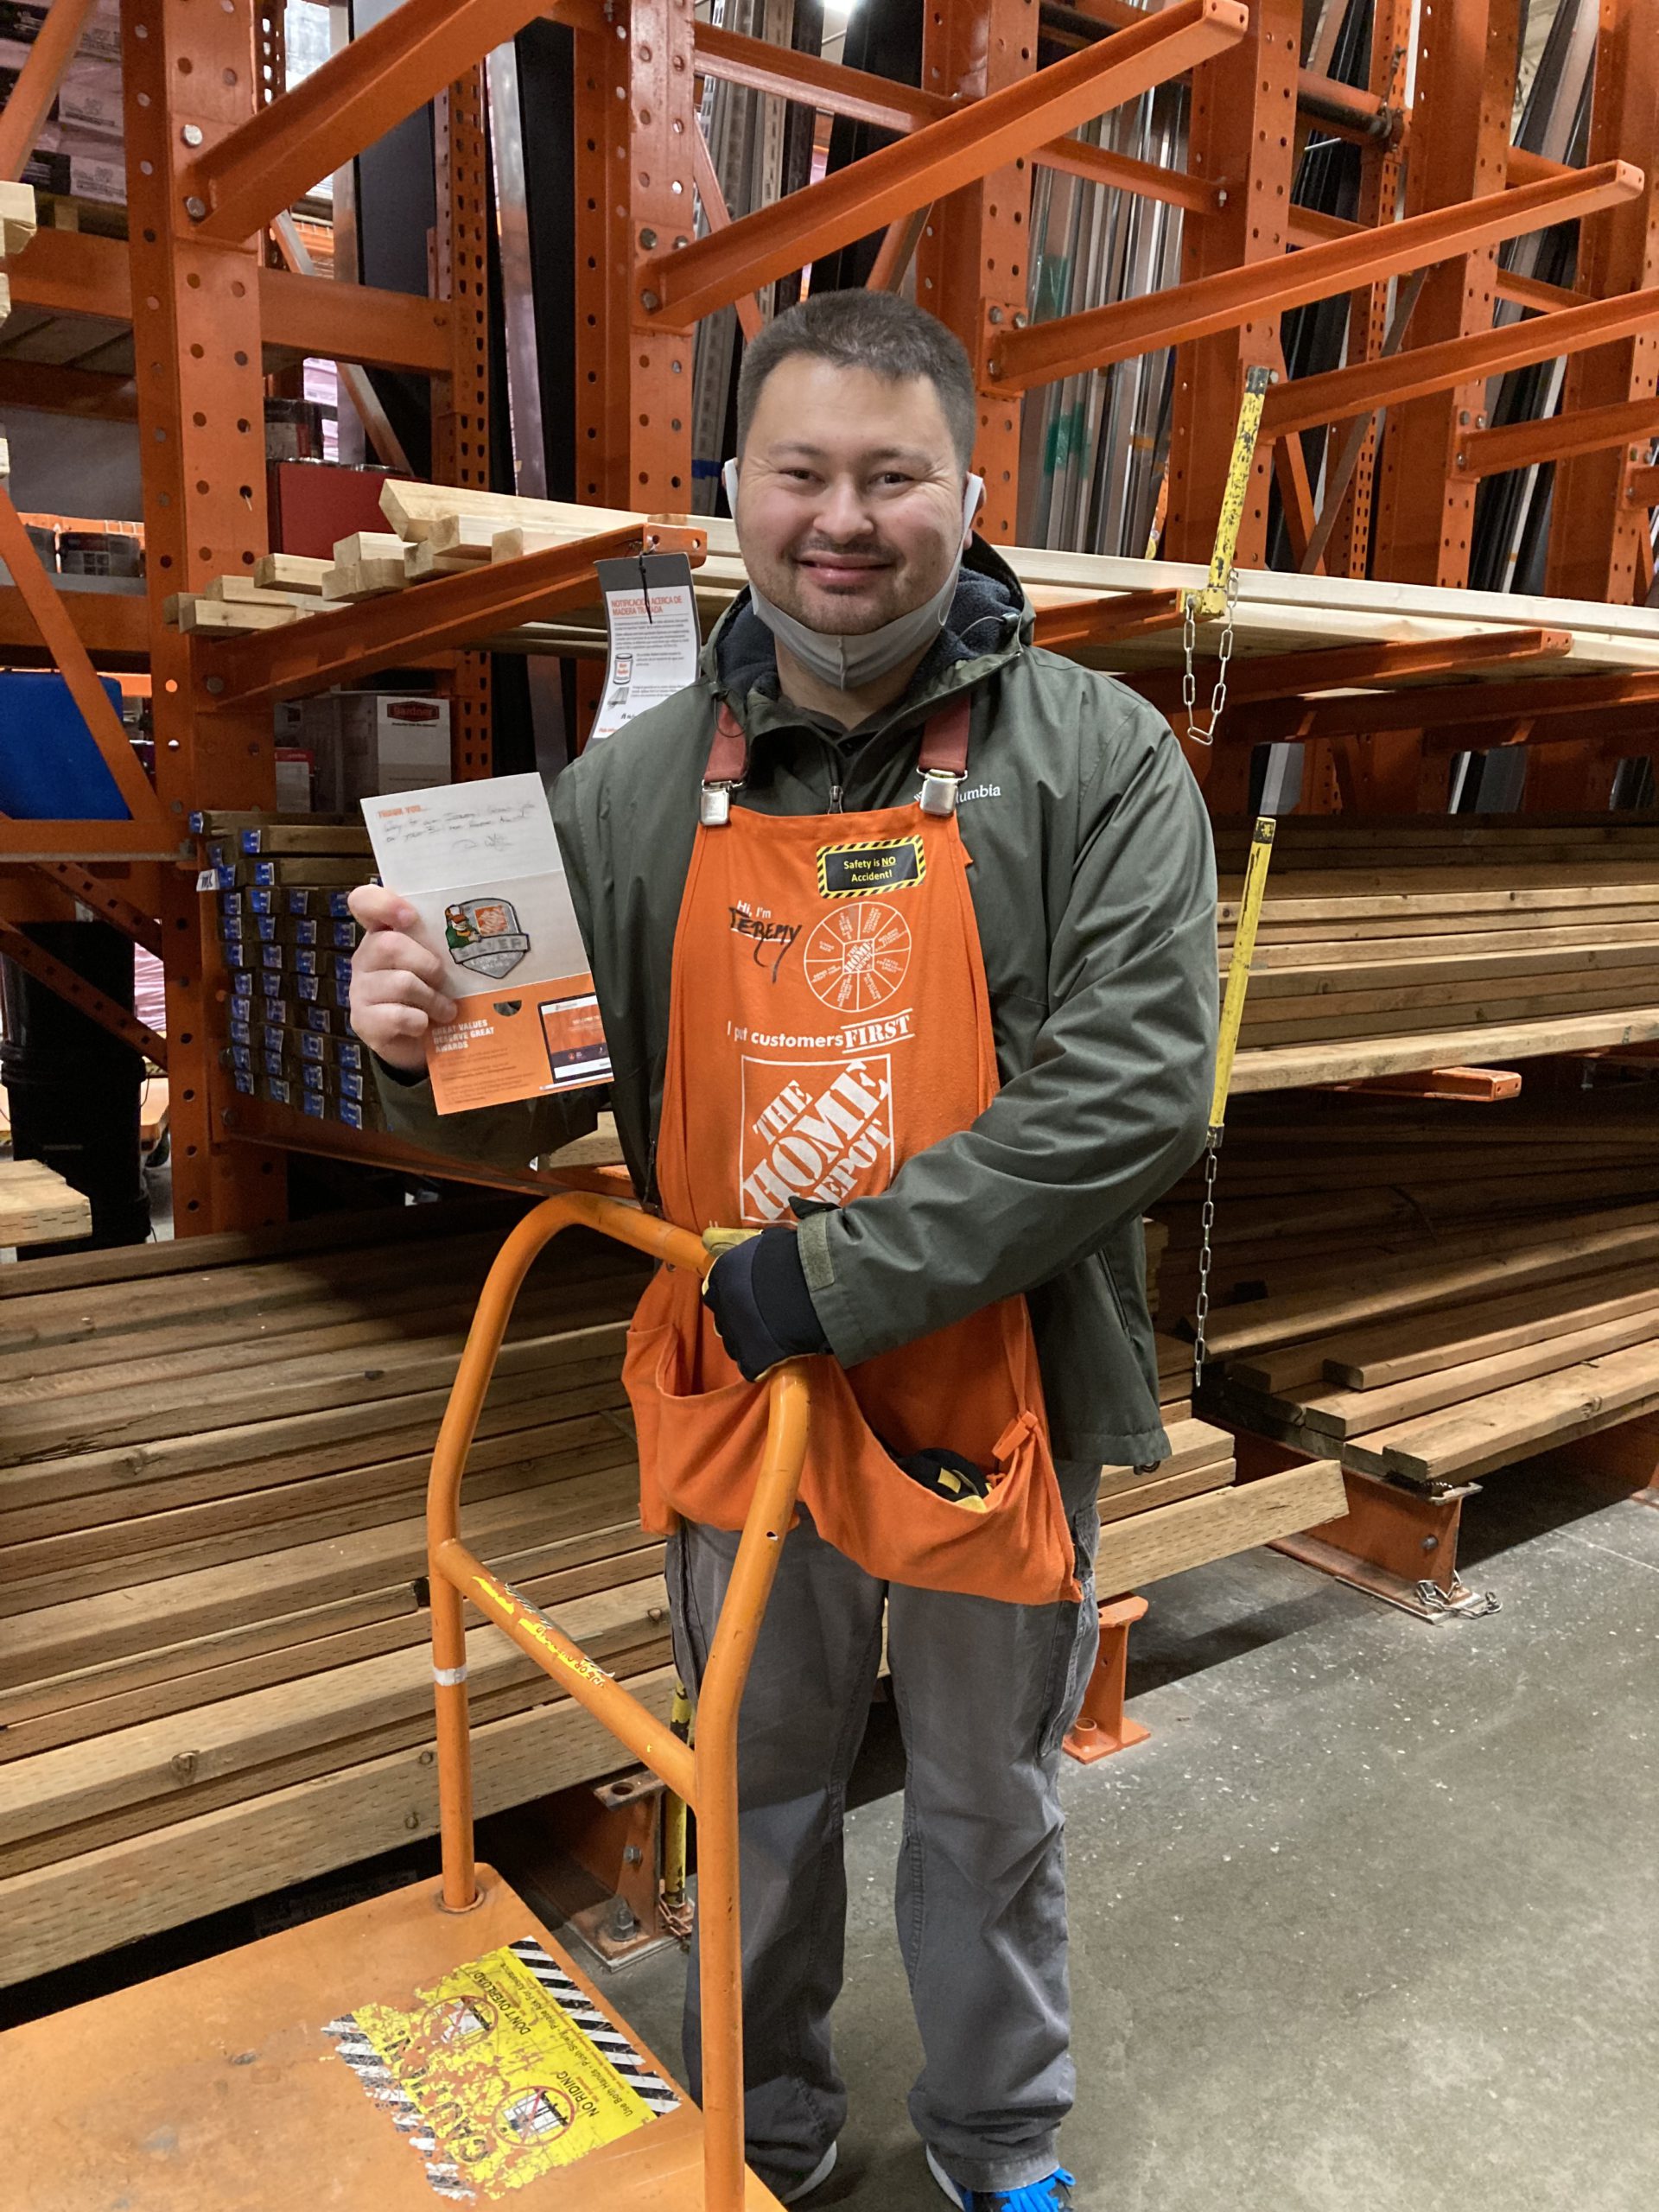 Image: Man with short brown hair wearing a Home Depot apron smiles, holding a card in one hand, his other hand on the handle of a Home Depot cart. He is standing in front of lumber.